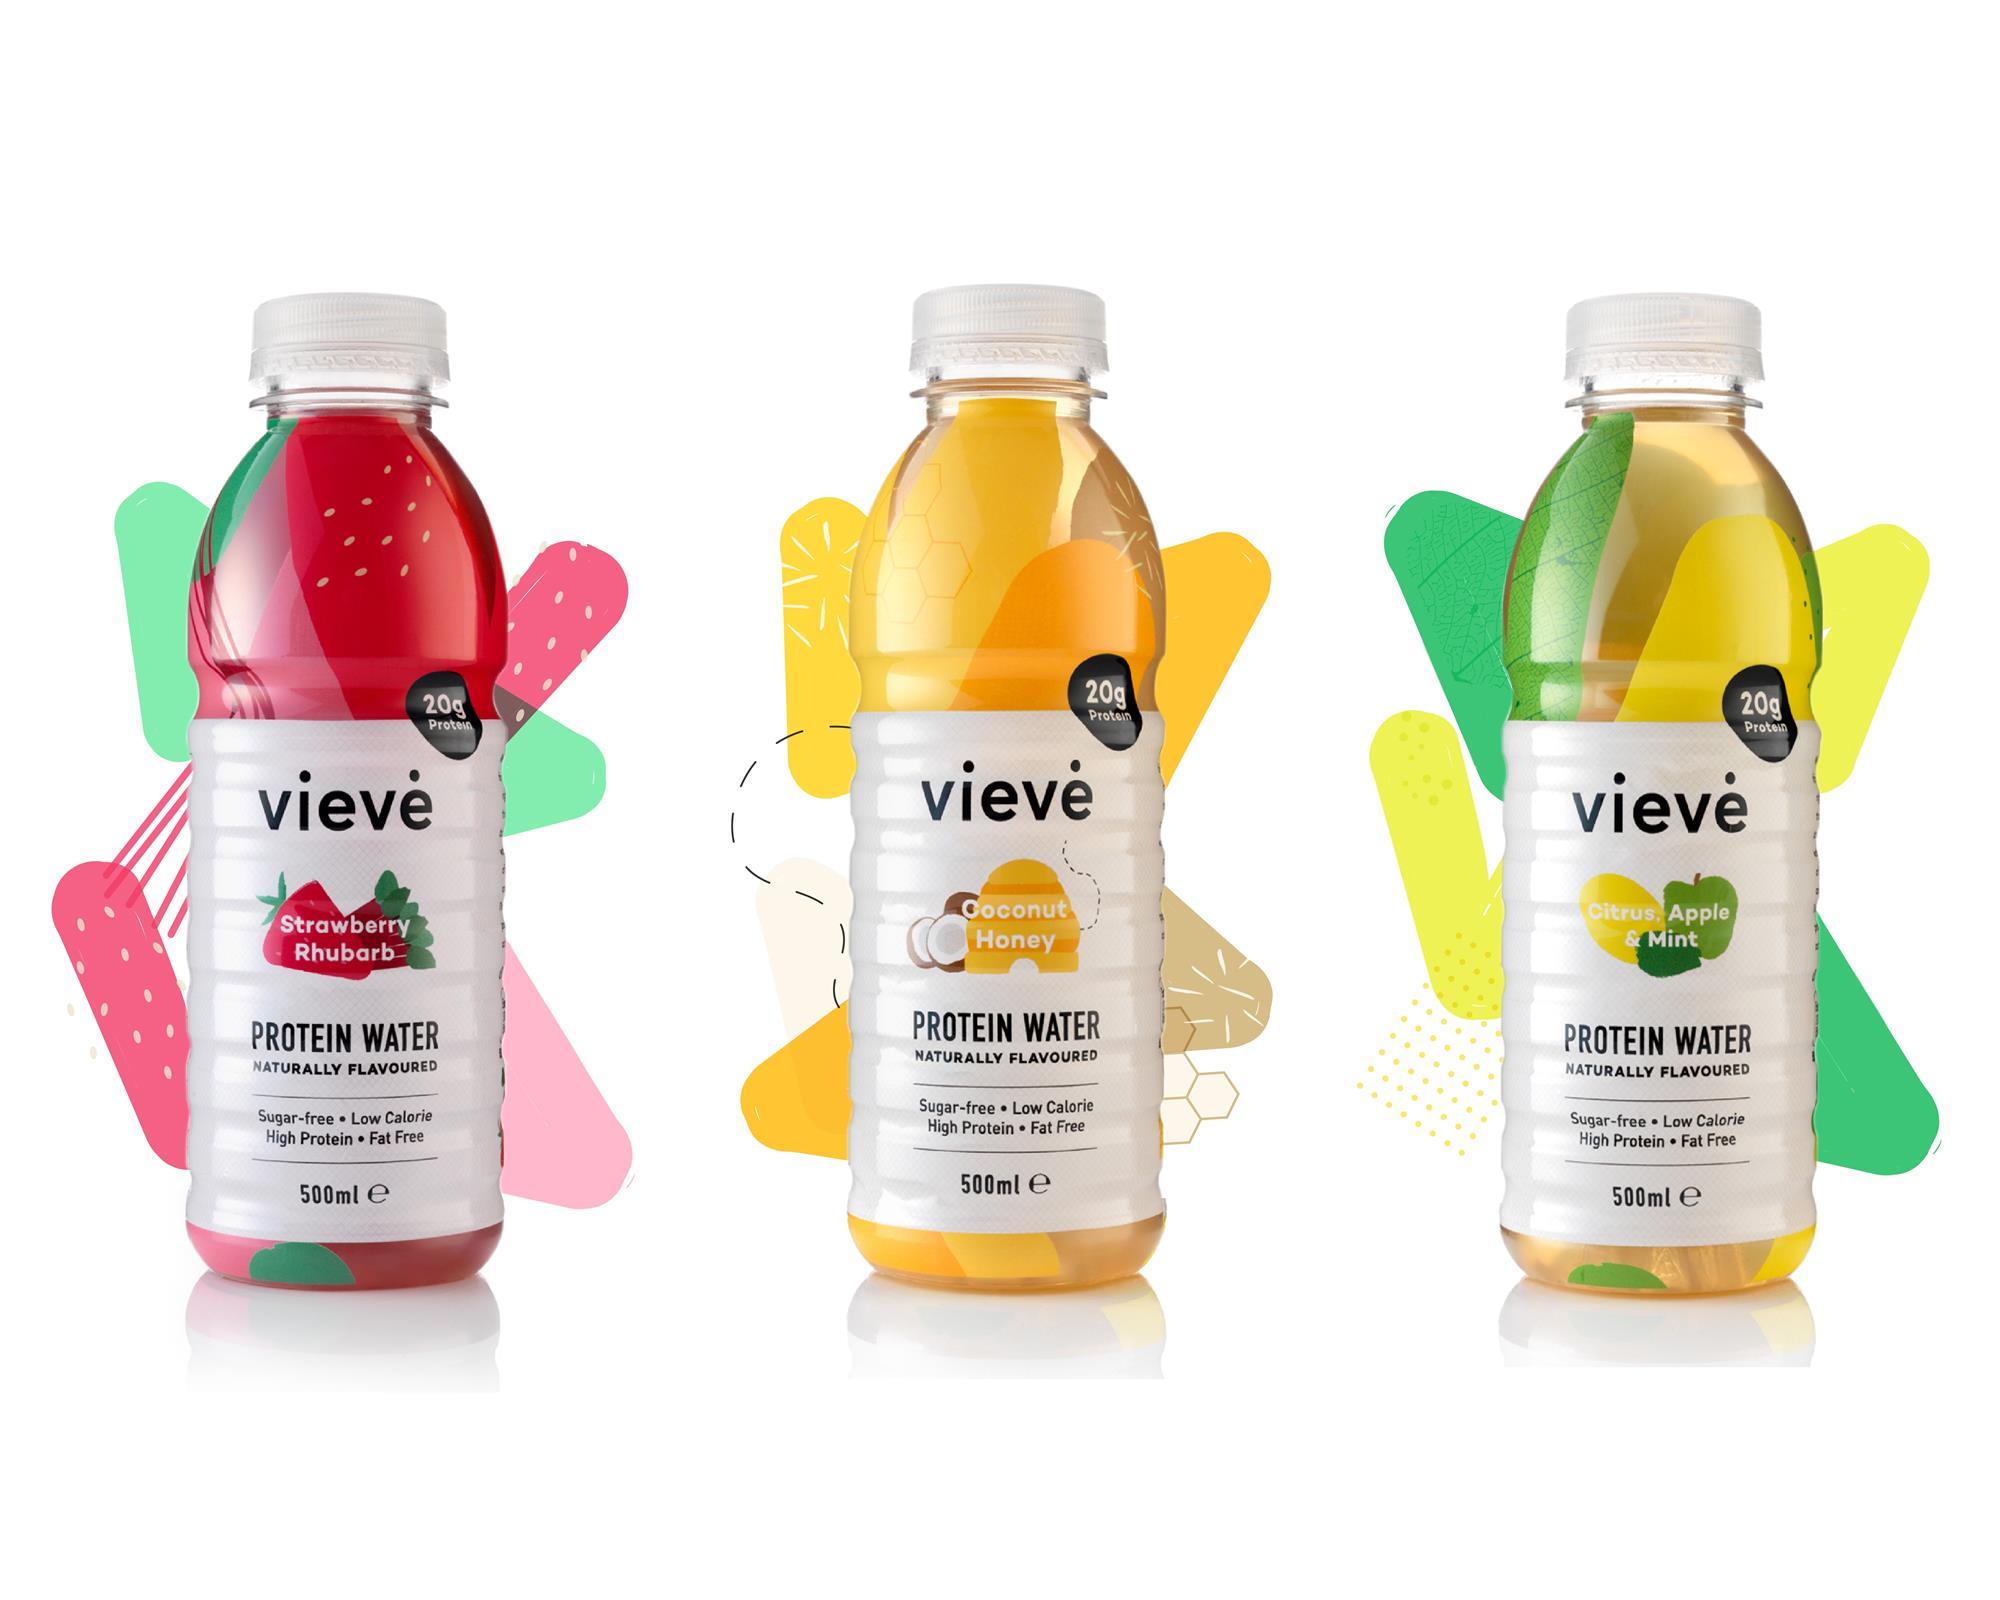 Vieve launches new Protein Water | Product News | Convenience Store